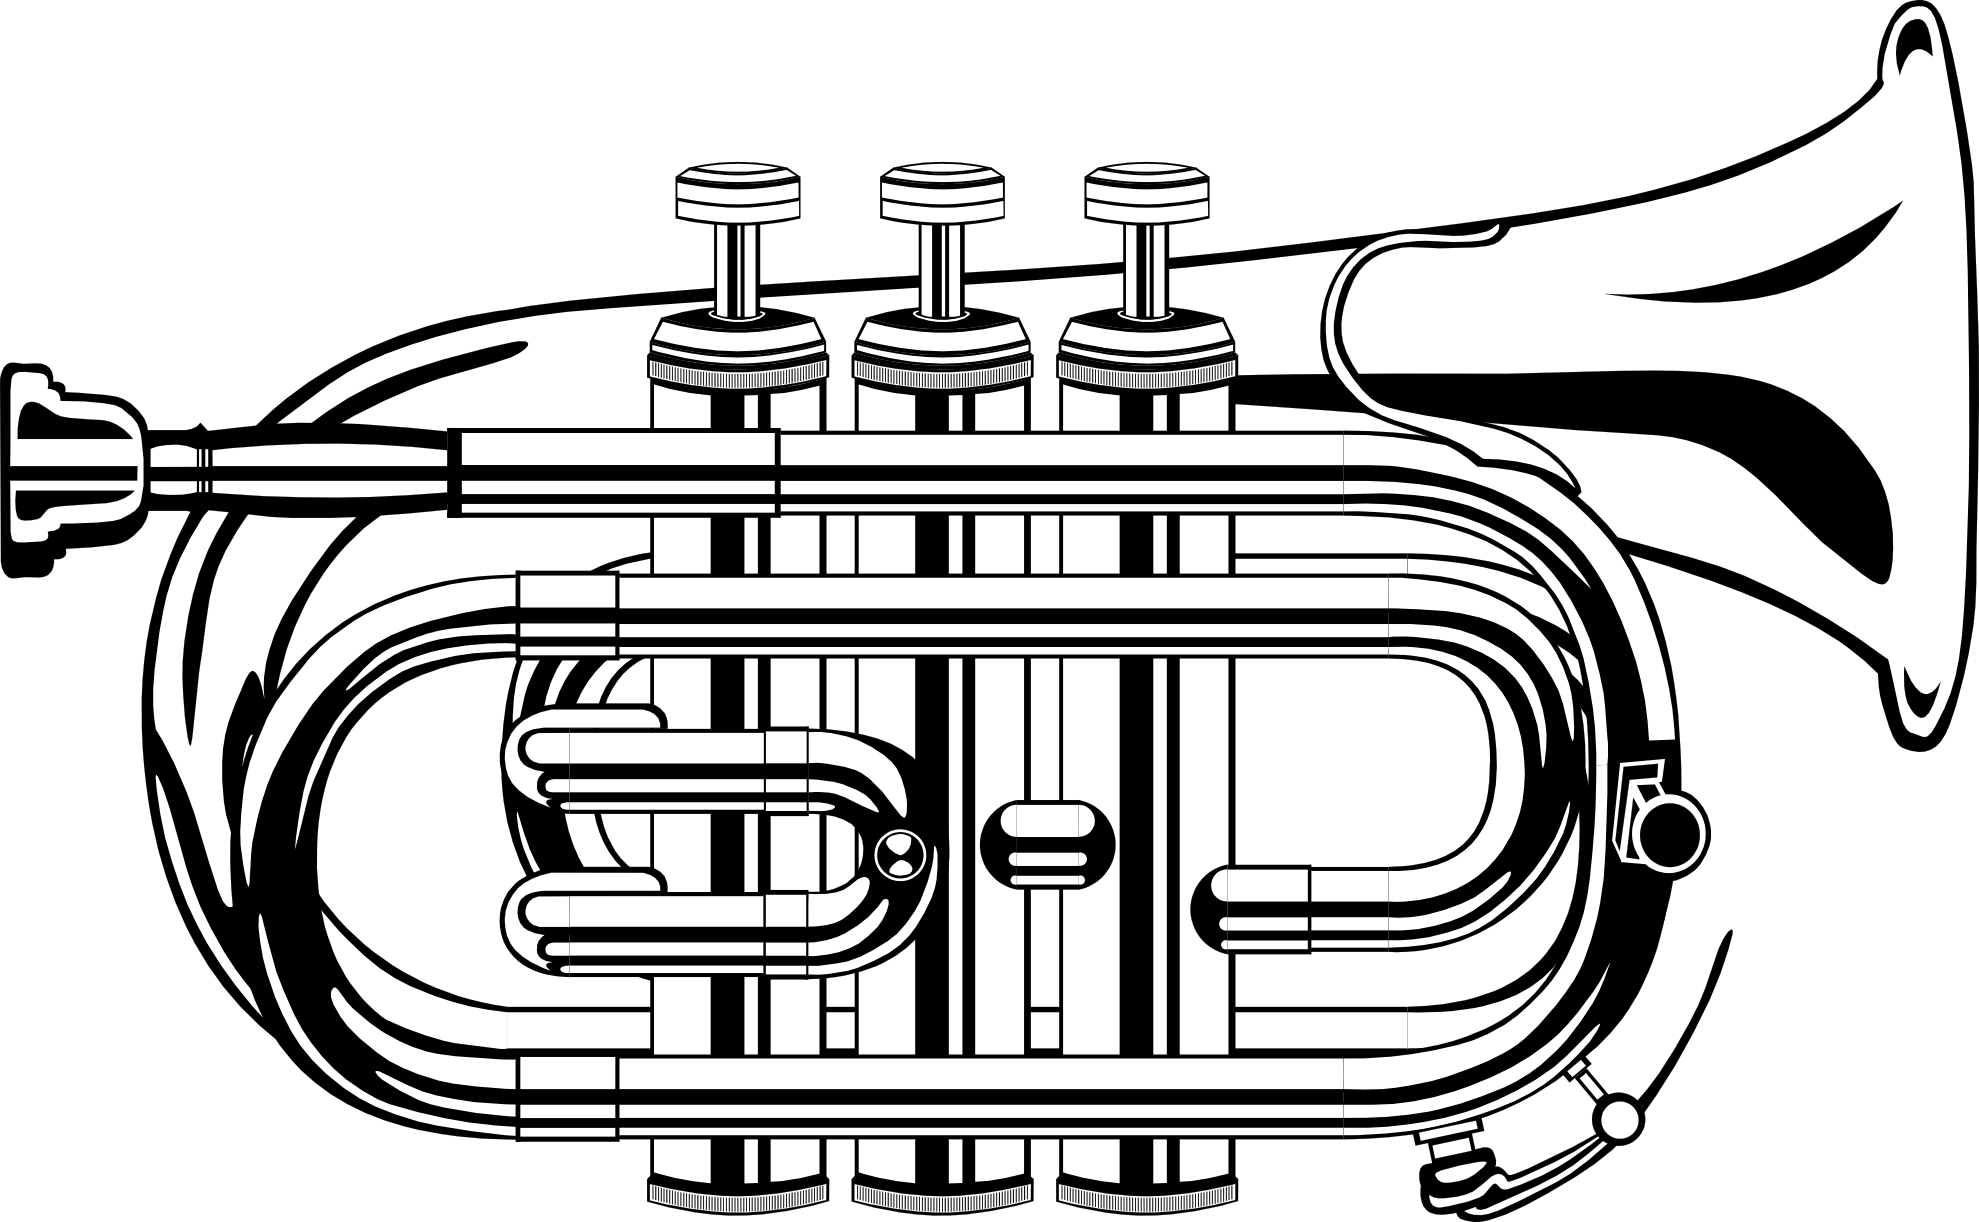 Trumpet black and white clipart kid